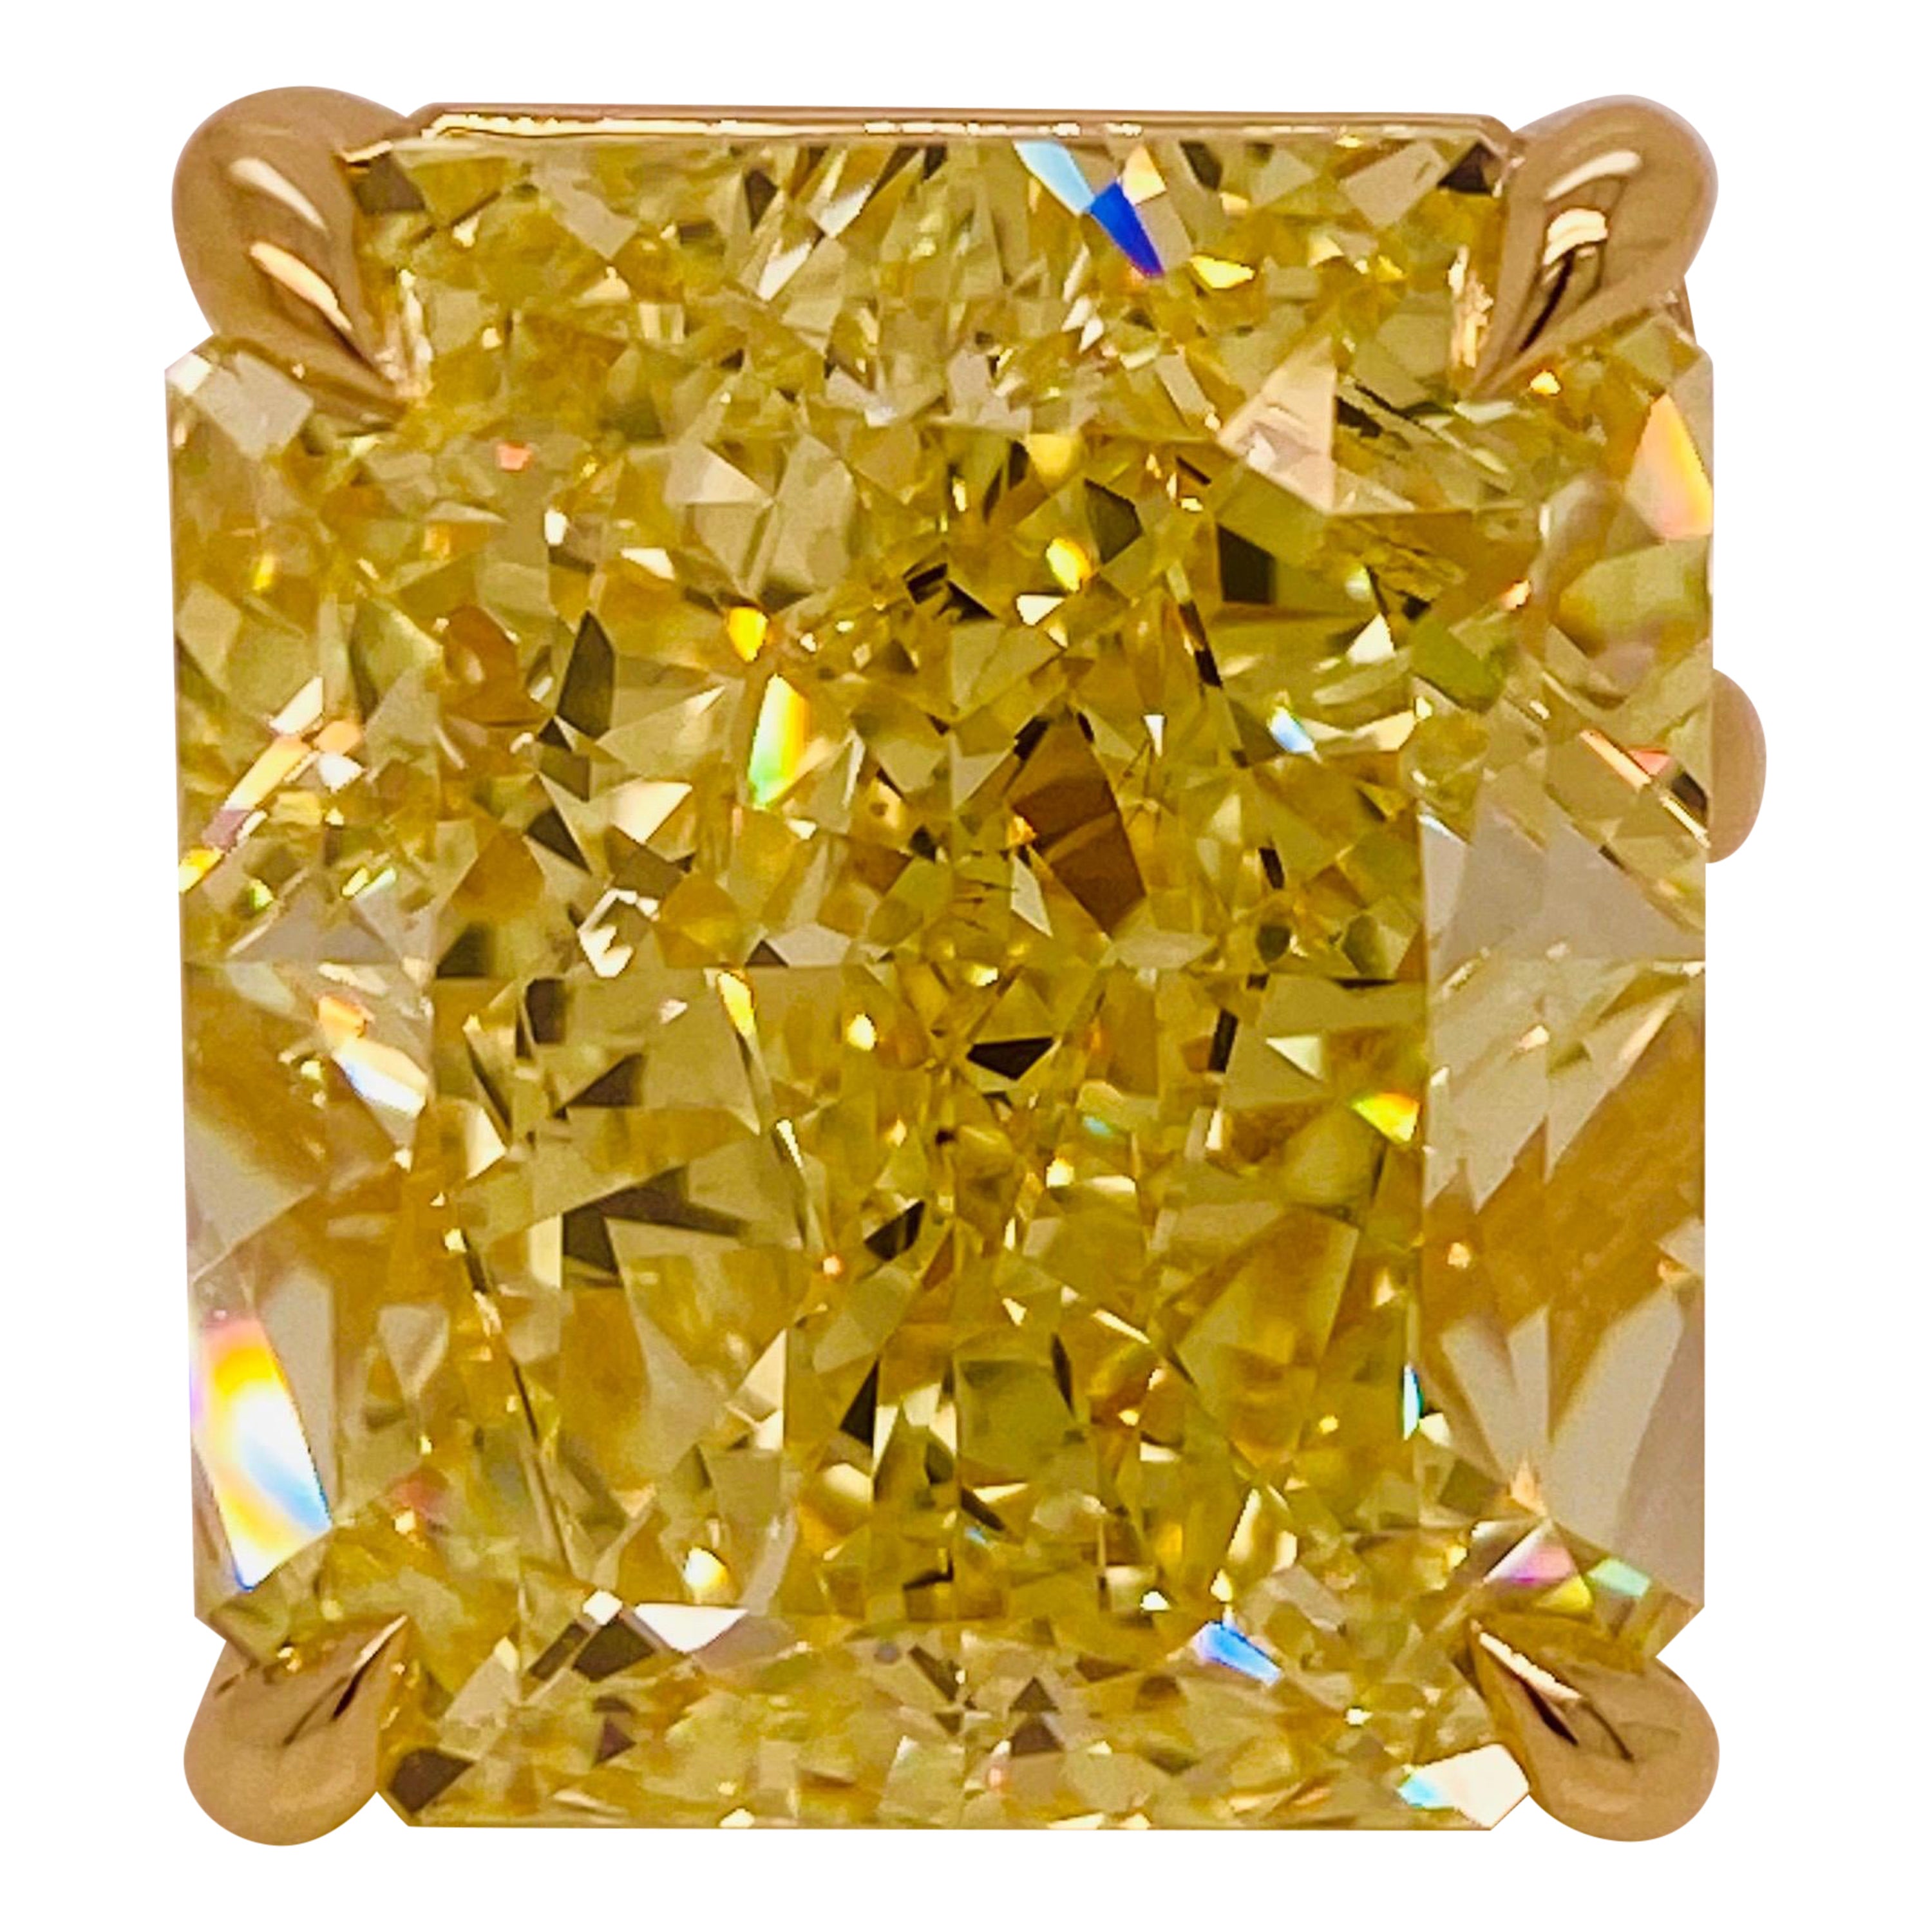 From the Emilio Jewelry Museum Vault,
A one of a kind 41.00ct + Fancy Intense Radiant Yellow Diamond, of mind blowing color, and fire! We created a simple mounting to be worn everyday. Can be redesigned by our team.
From Emilio Jewelry, a well known